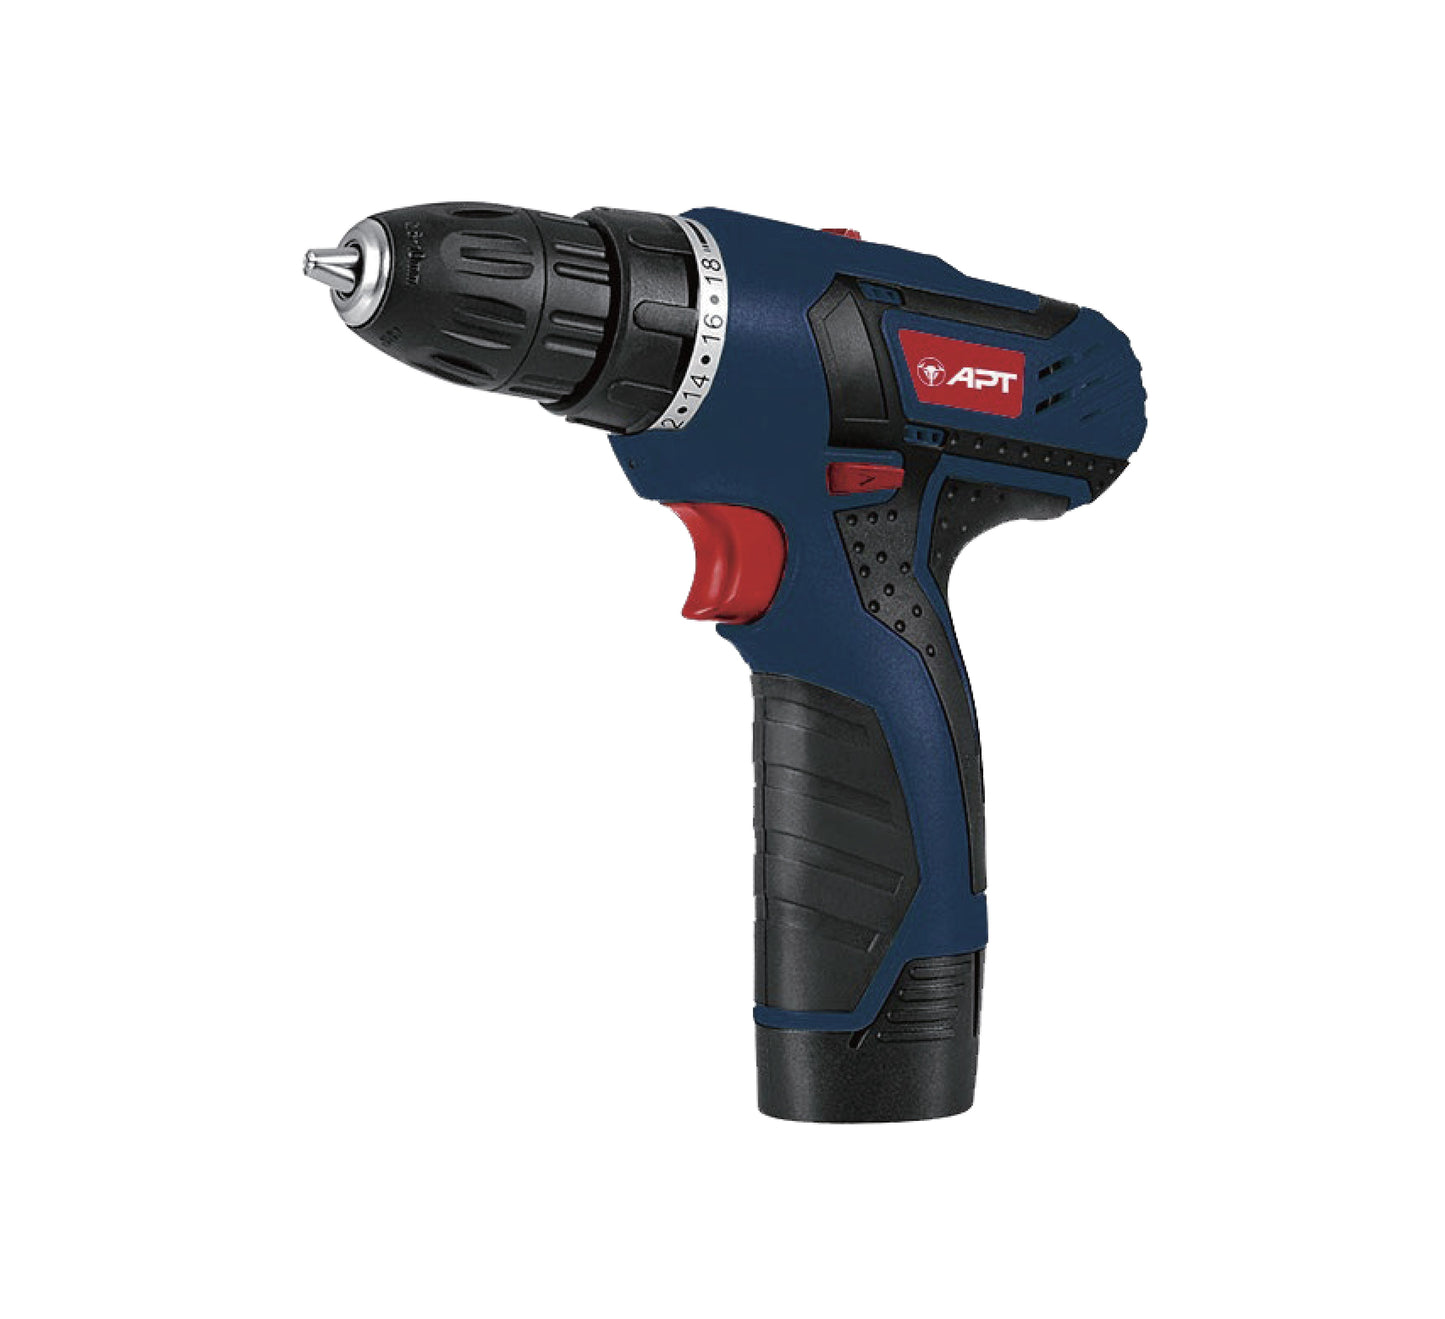 APT CORDLESS DRILL WITH 2 LITHIUM ION BATTERIES 12V 30N.M - DW15105